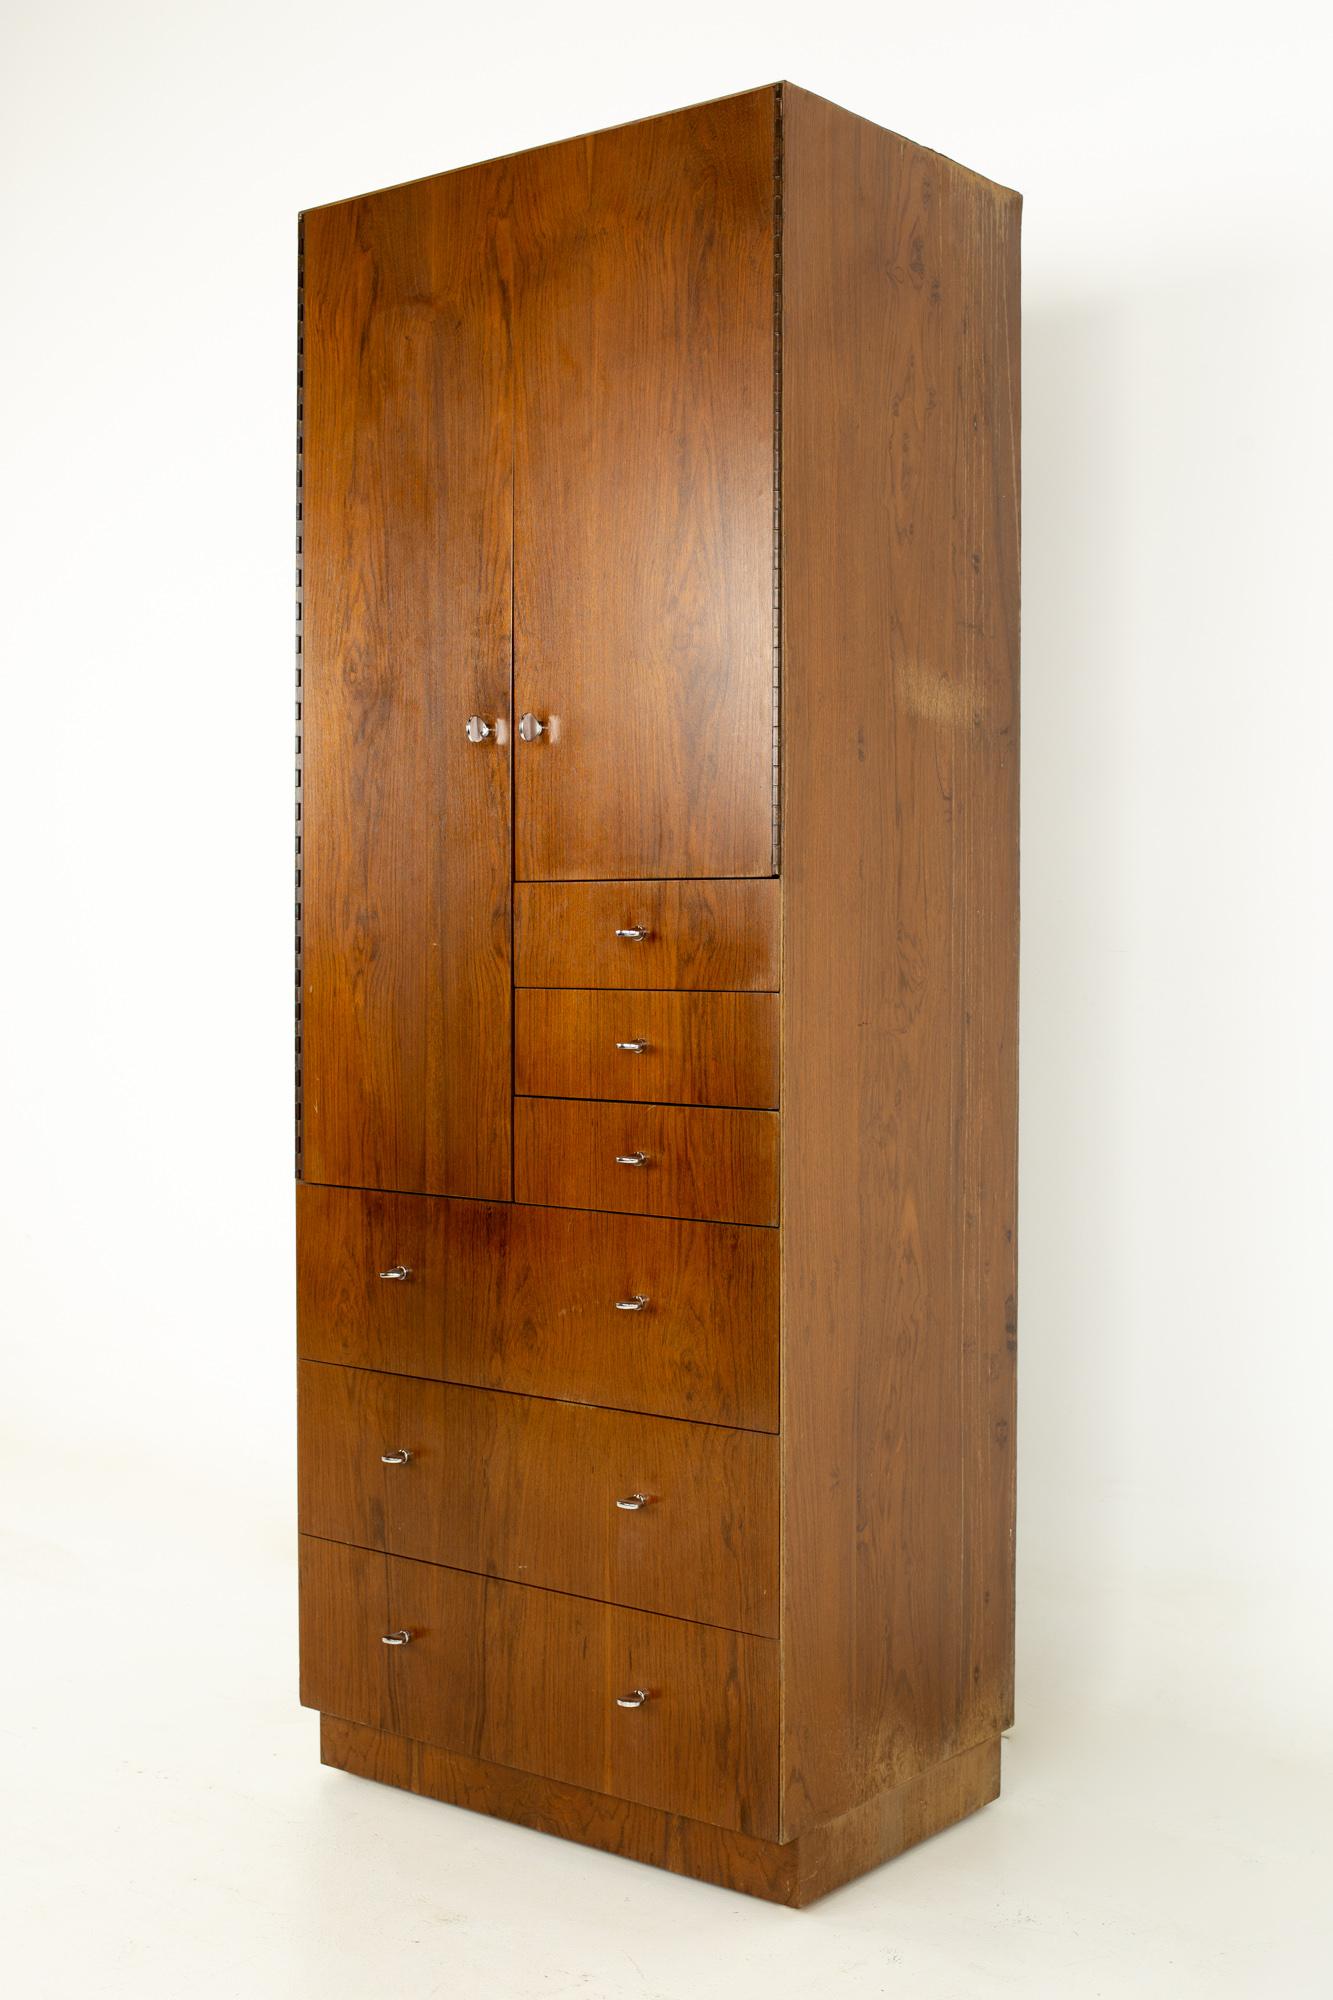 Directional mid century walnut and chrome armoire dresser
This dresser measures: 27 wide x 18 deep x 70.5 inches high

All pieces of furniture can be had in what we call restored vintage condition. That means the piece is restored upon purchase